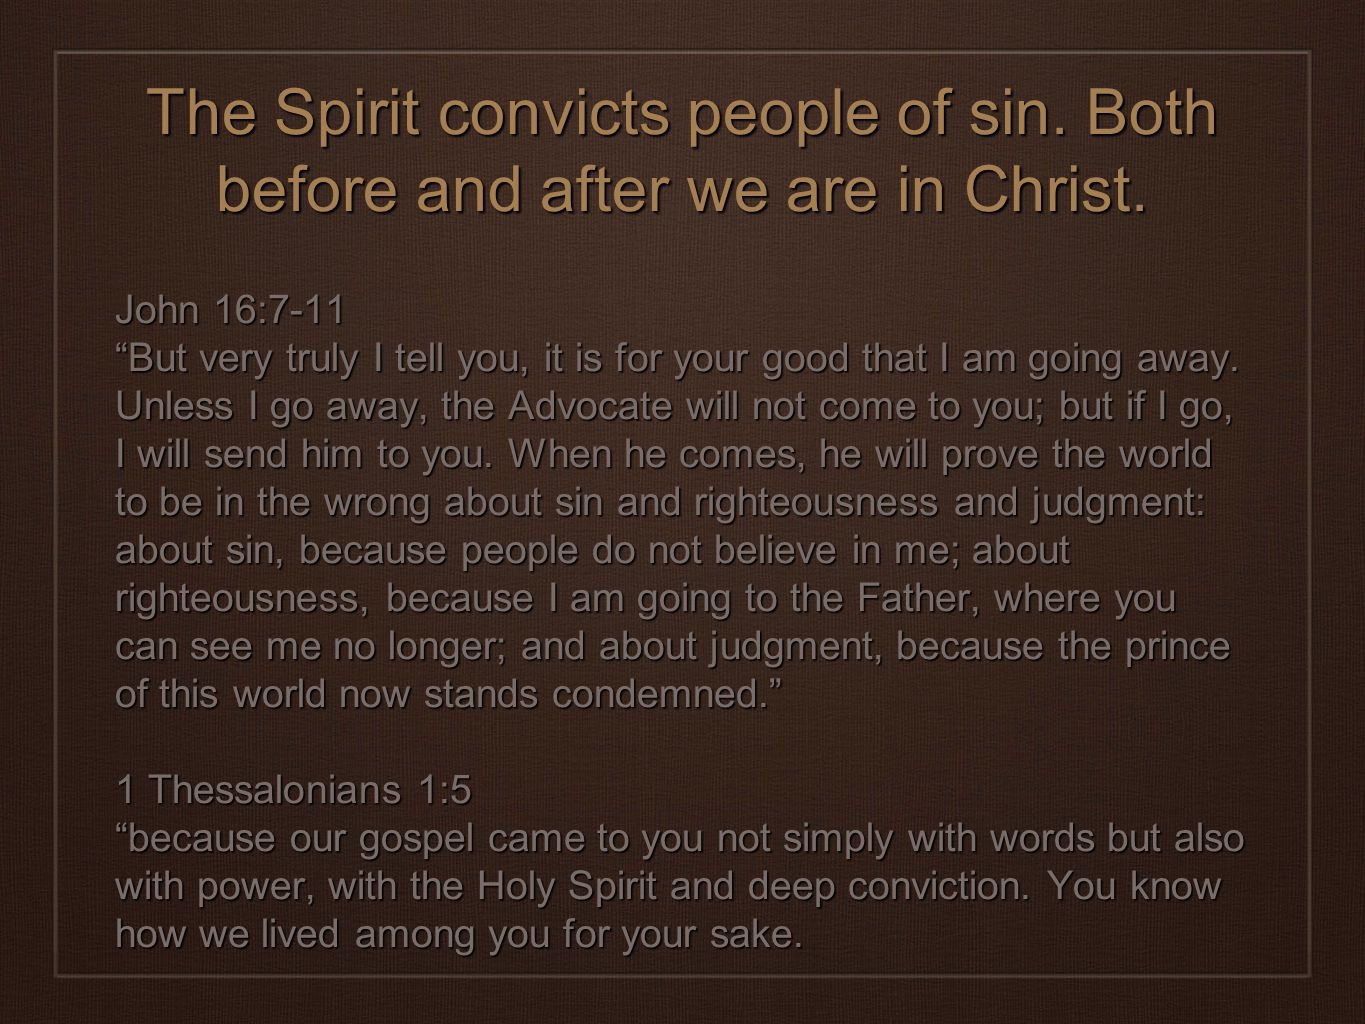 The Spirit convicts people of sin. Both before and after we are in Christ.